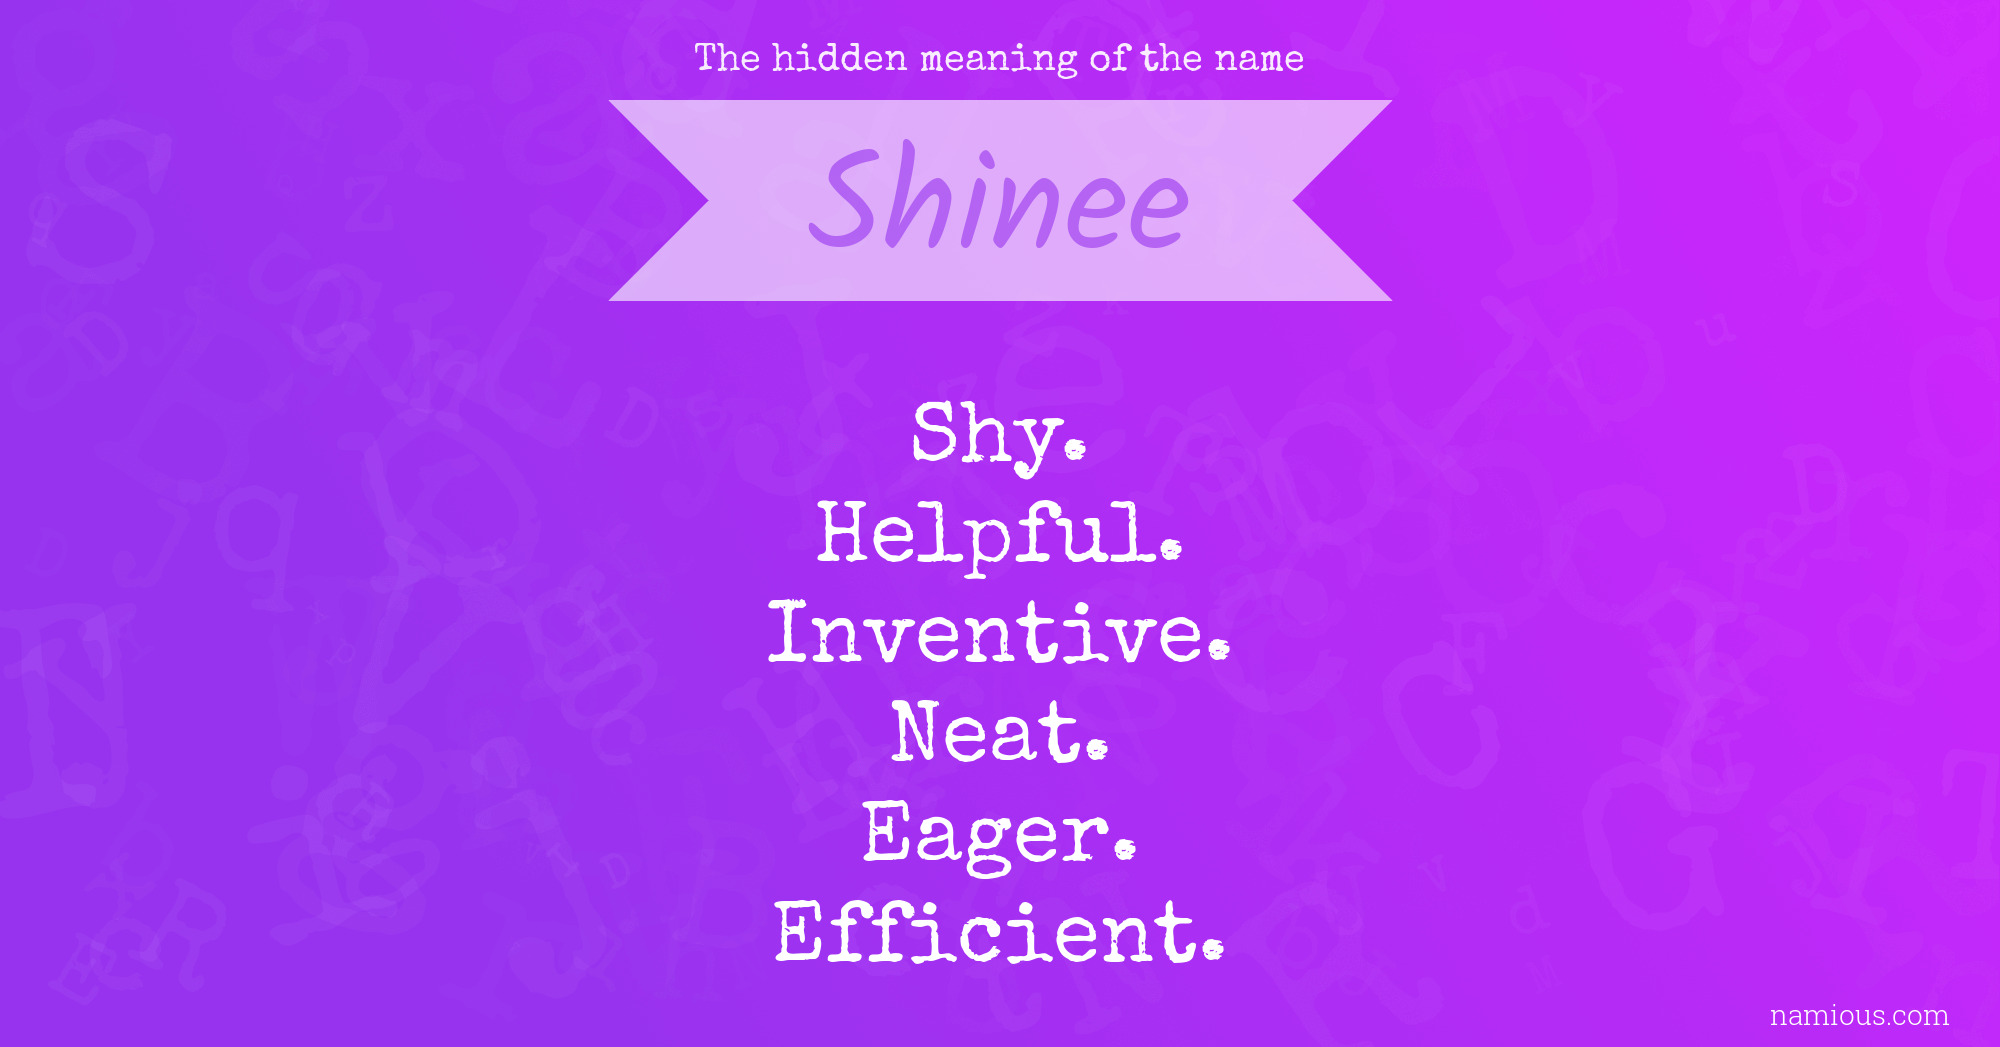 The hidden meaning of the name Shinee